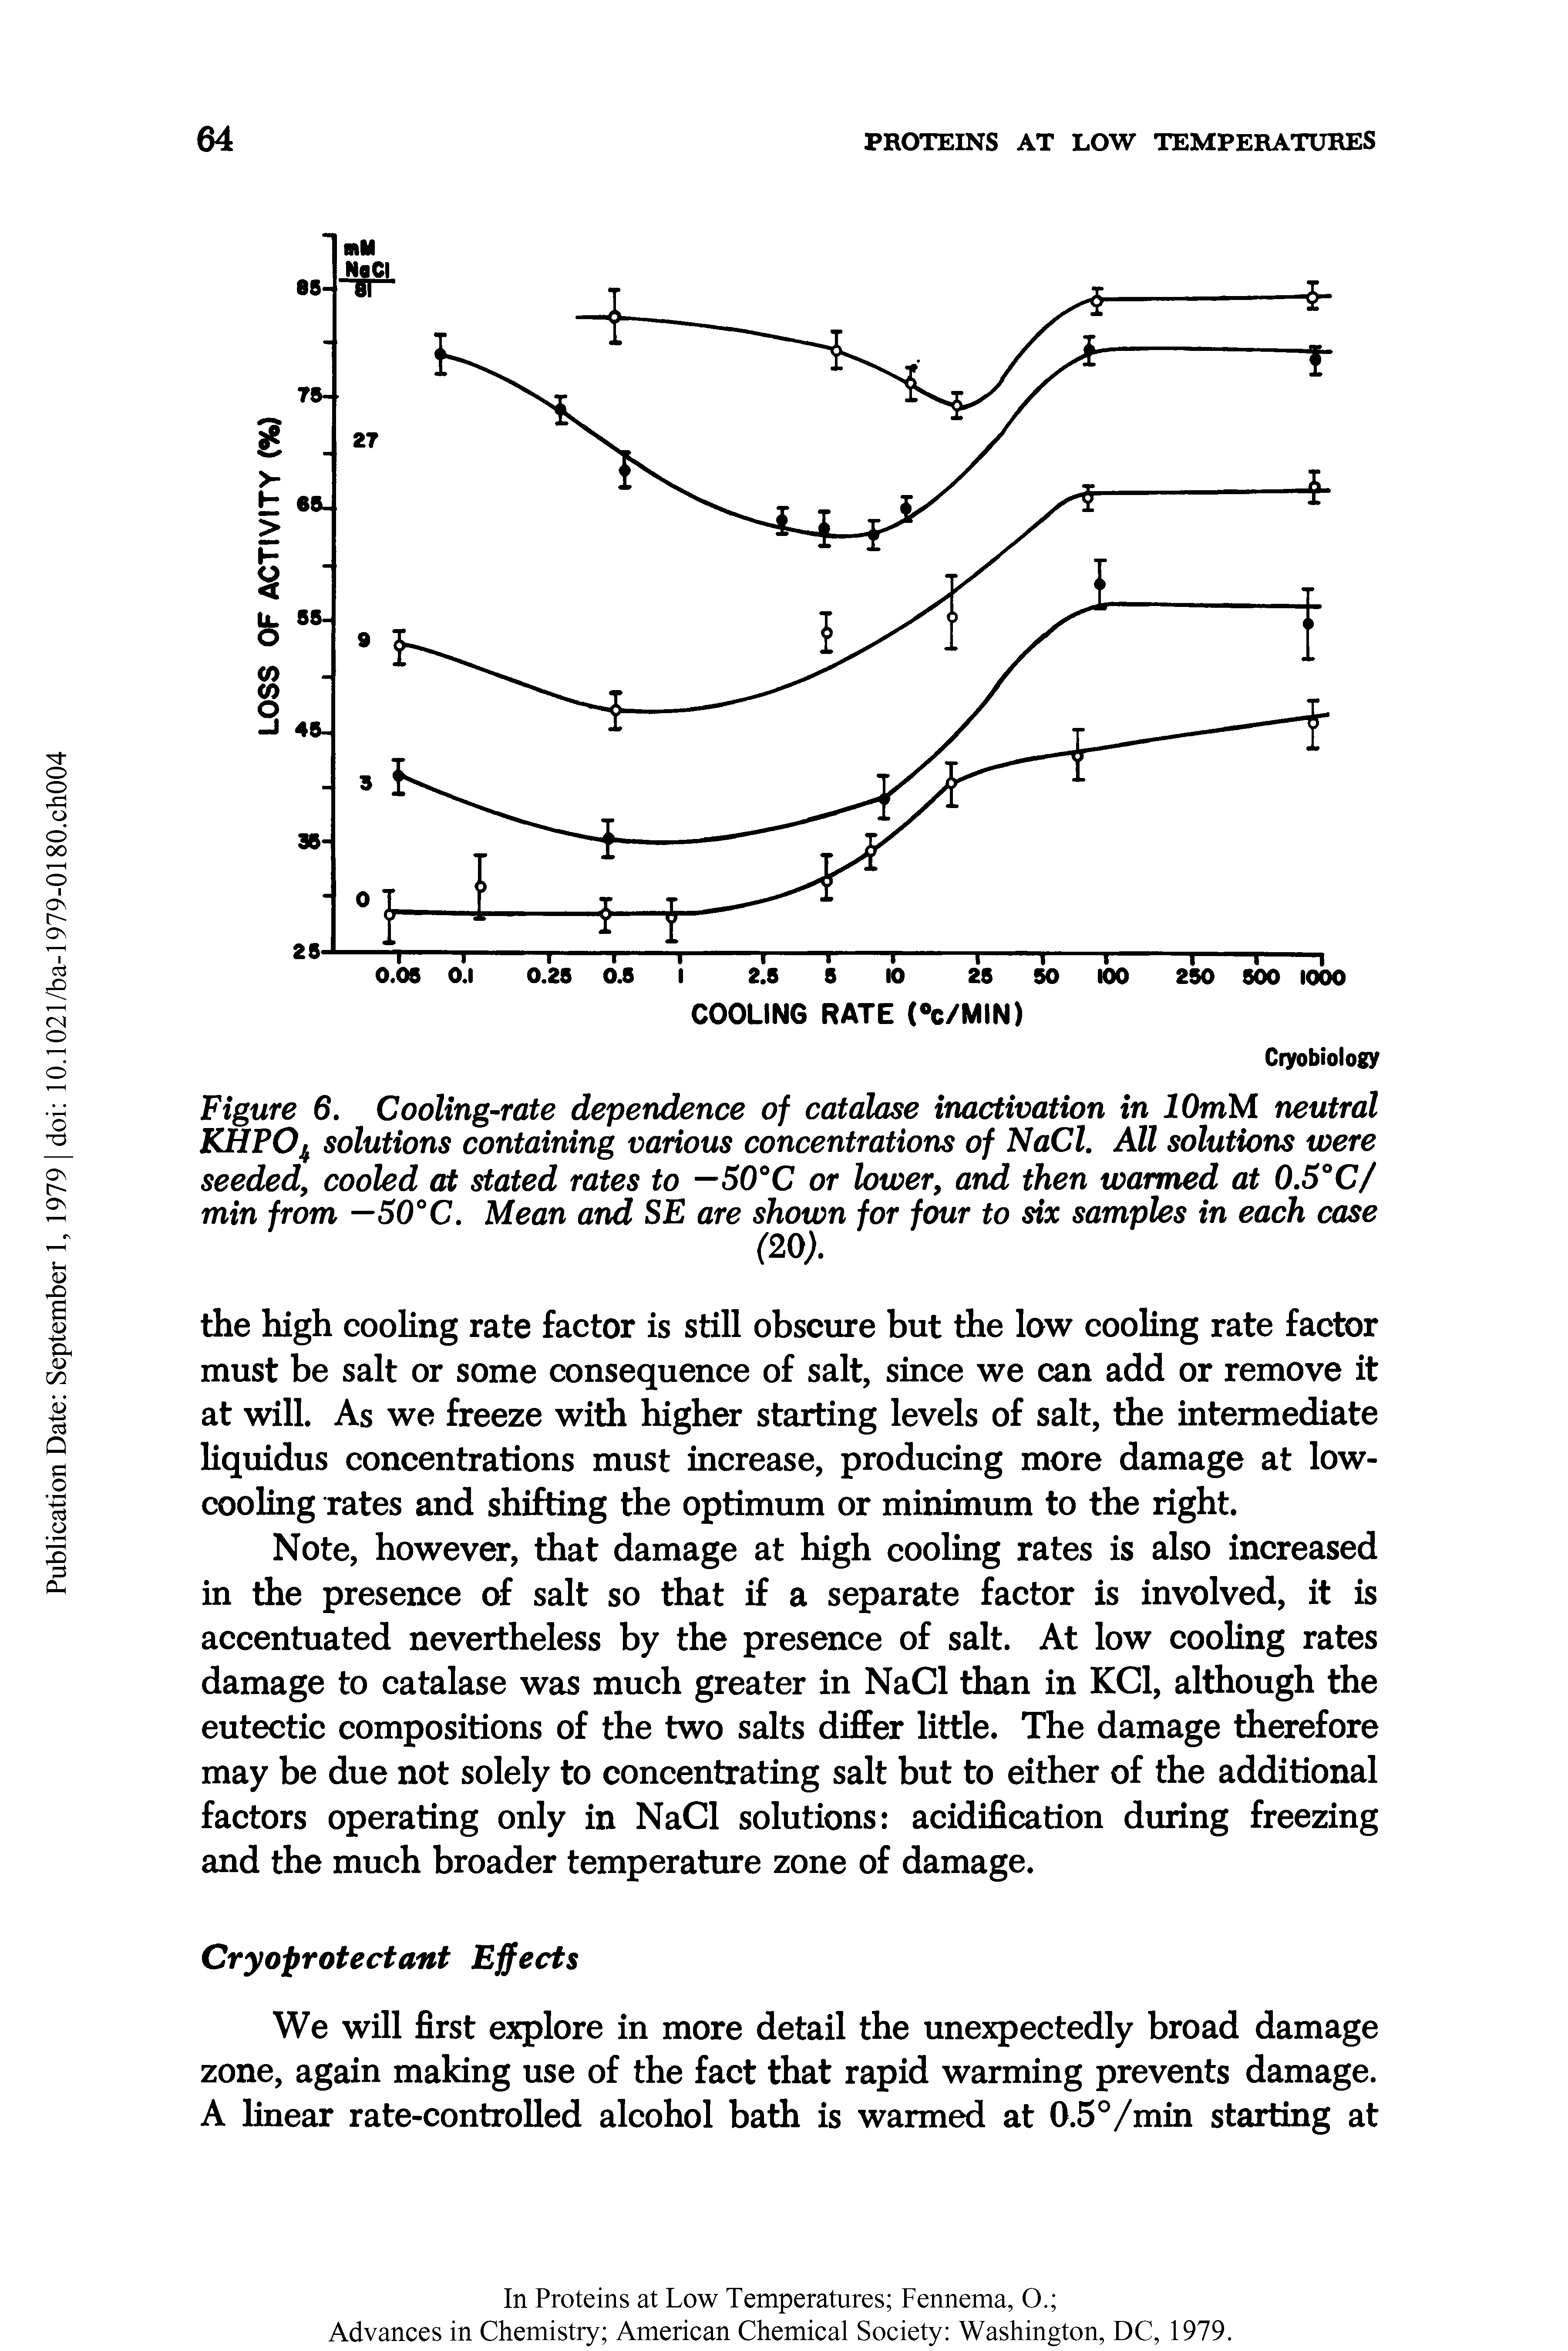 Figure 6. Cooling-rate dependence of catalase inactivation in lOmM neutral KHPO solutions containing various concentrations of NaCl. All solutions were seeded, cooled at stated rates to —50°C or lower, and then warmed at 0.5°C/ min from —50°C. Mean and SE are shown for four to six samples in each case...